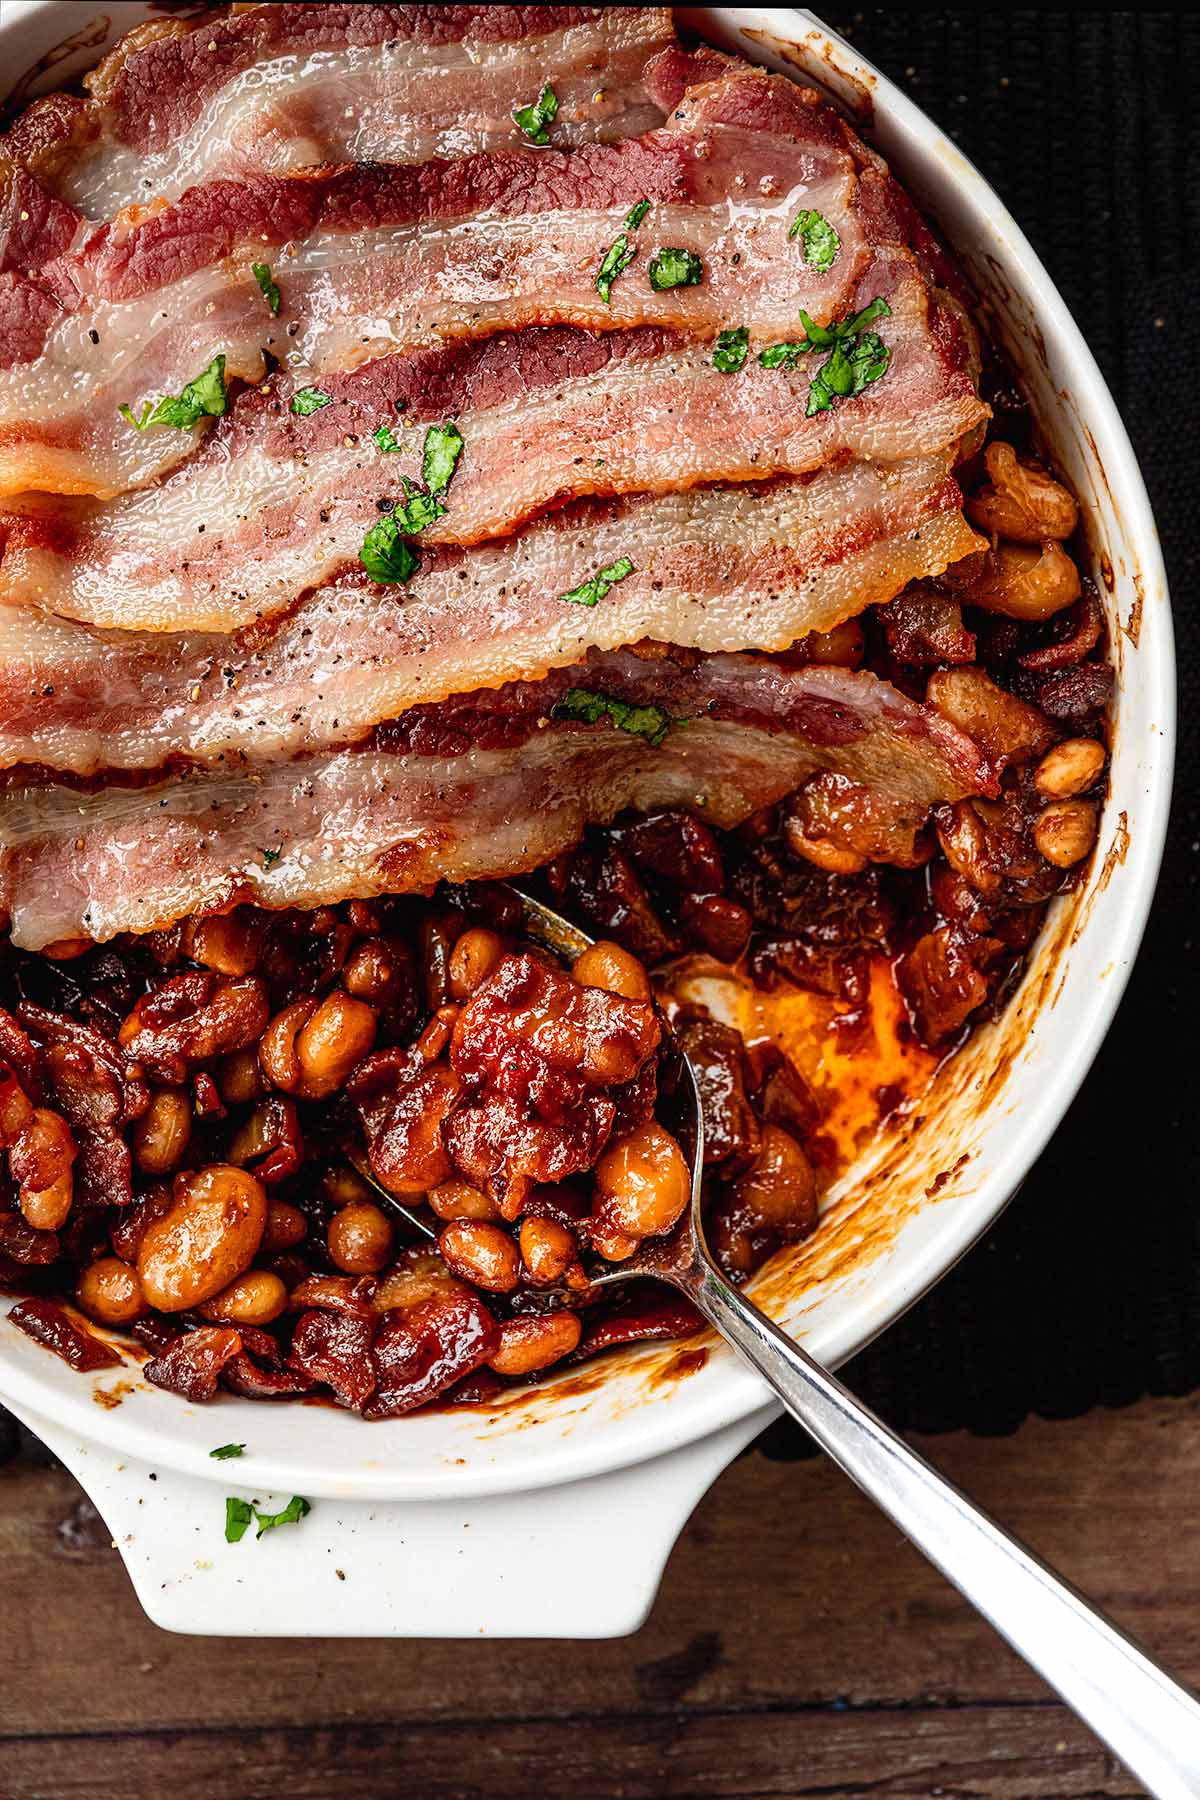 New England Baked Beans in baking dish wtih bacon slices layered on top with serving spoon